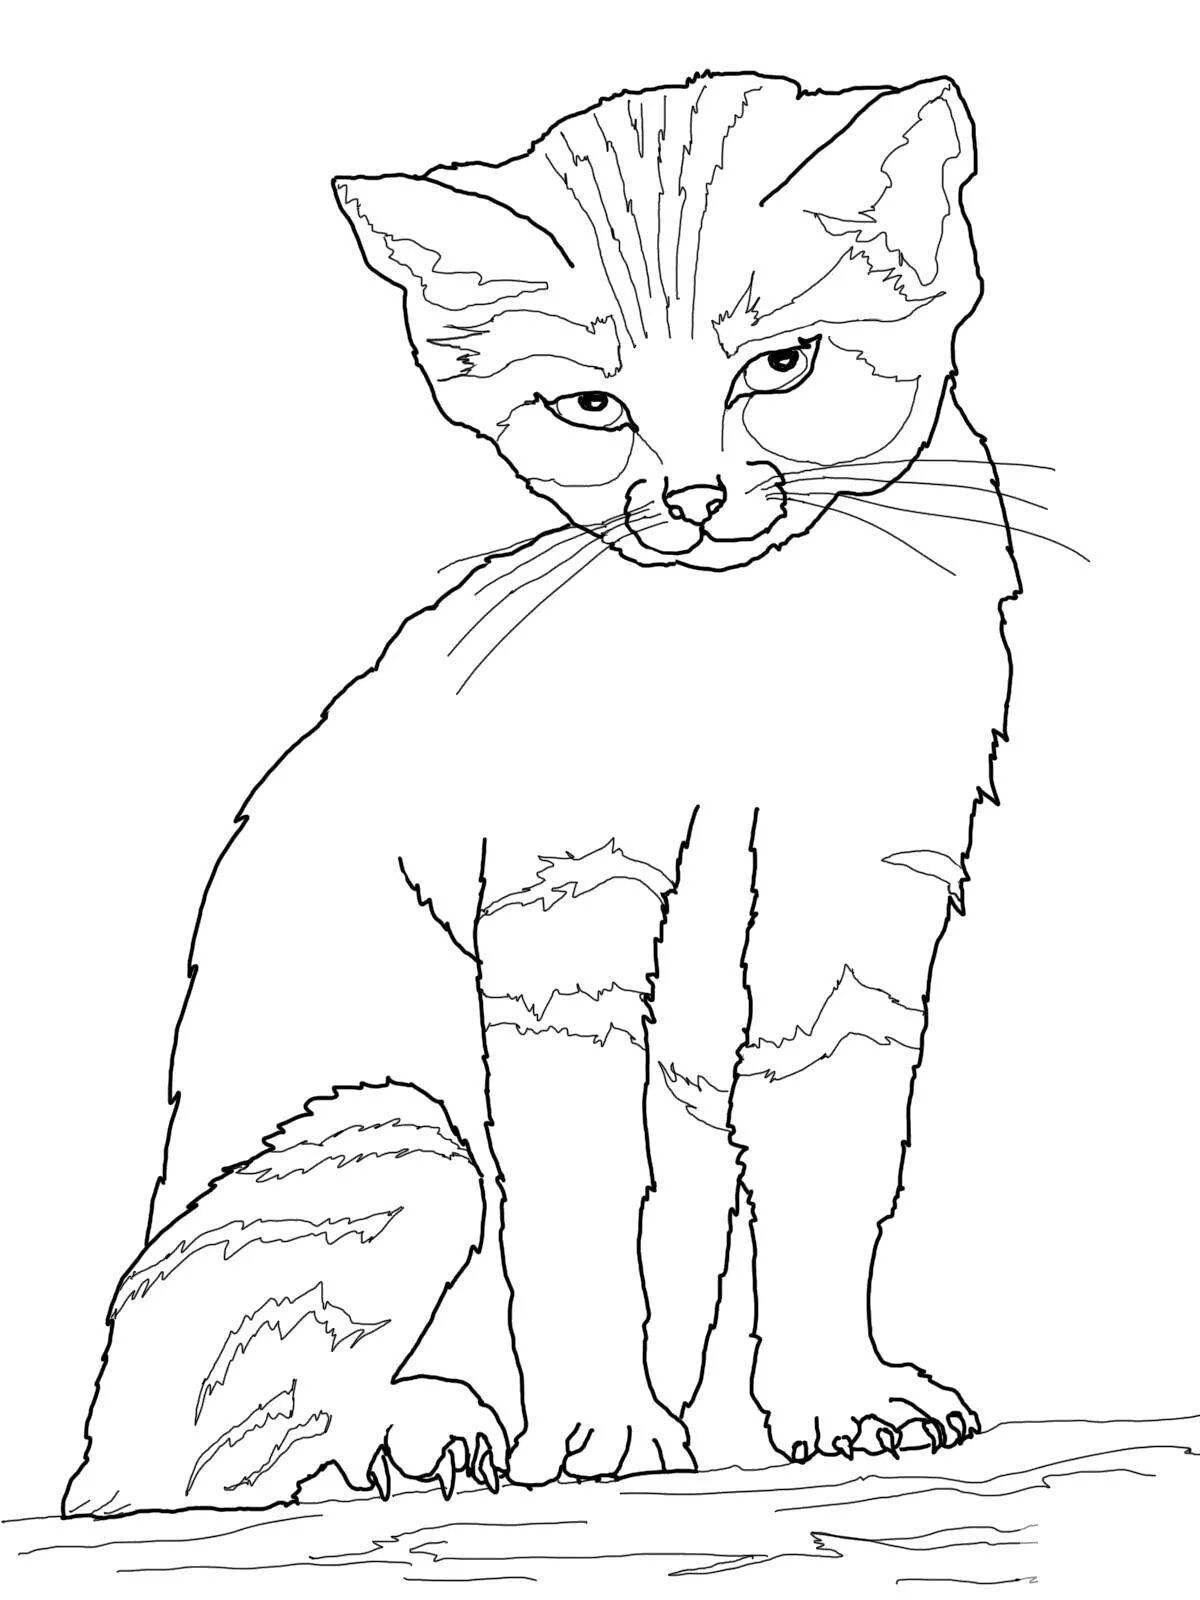 Adorable cat coloring page